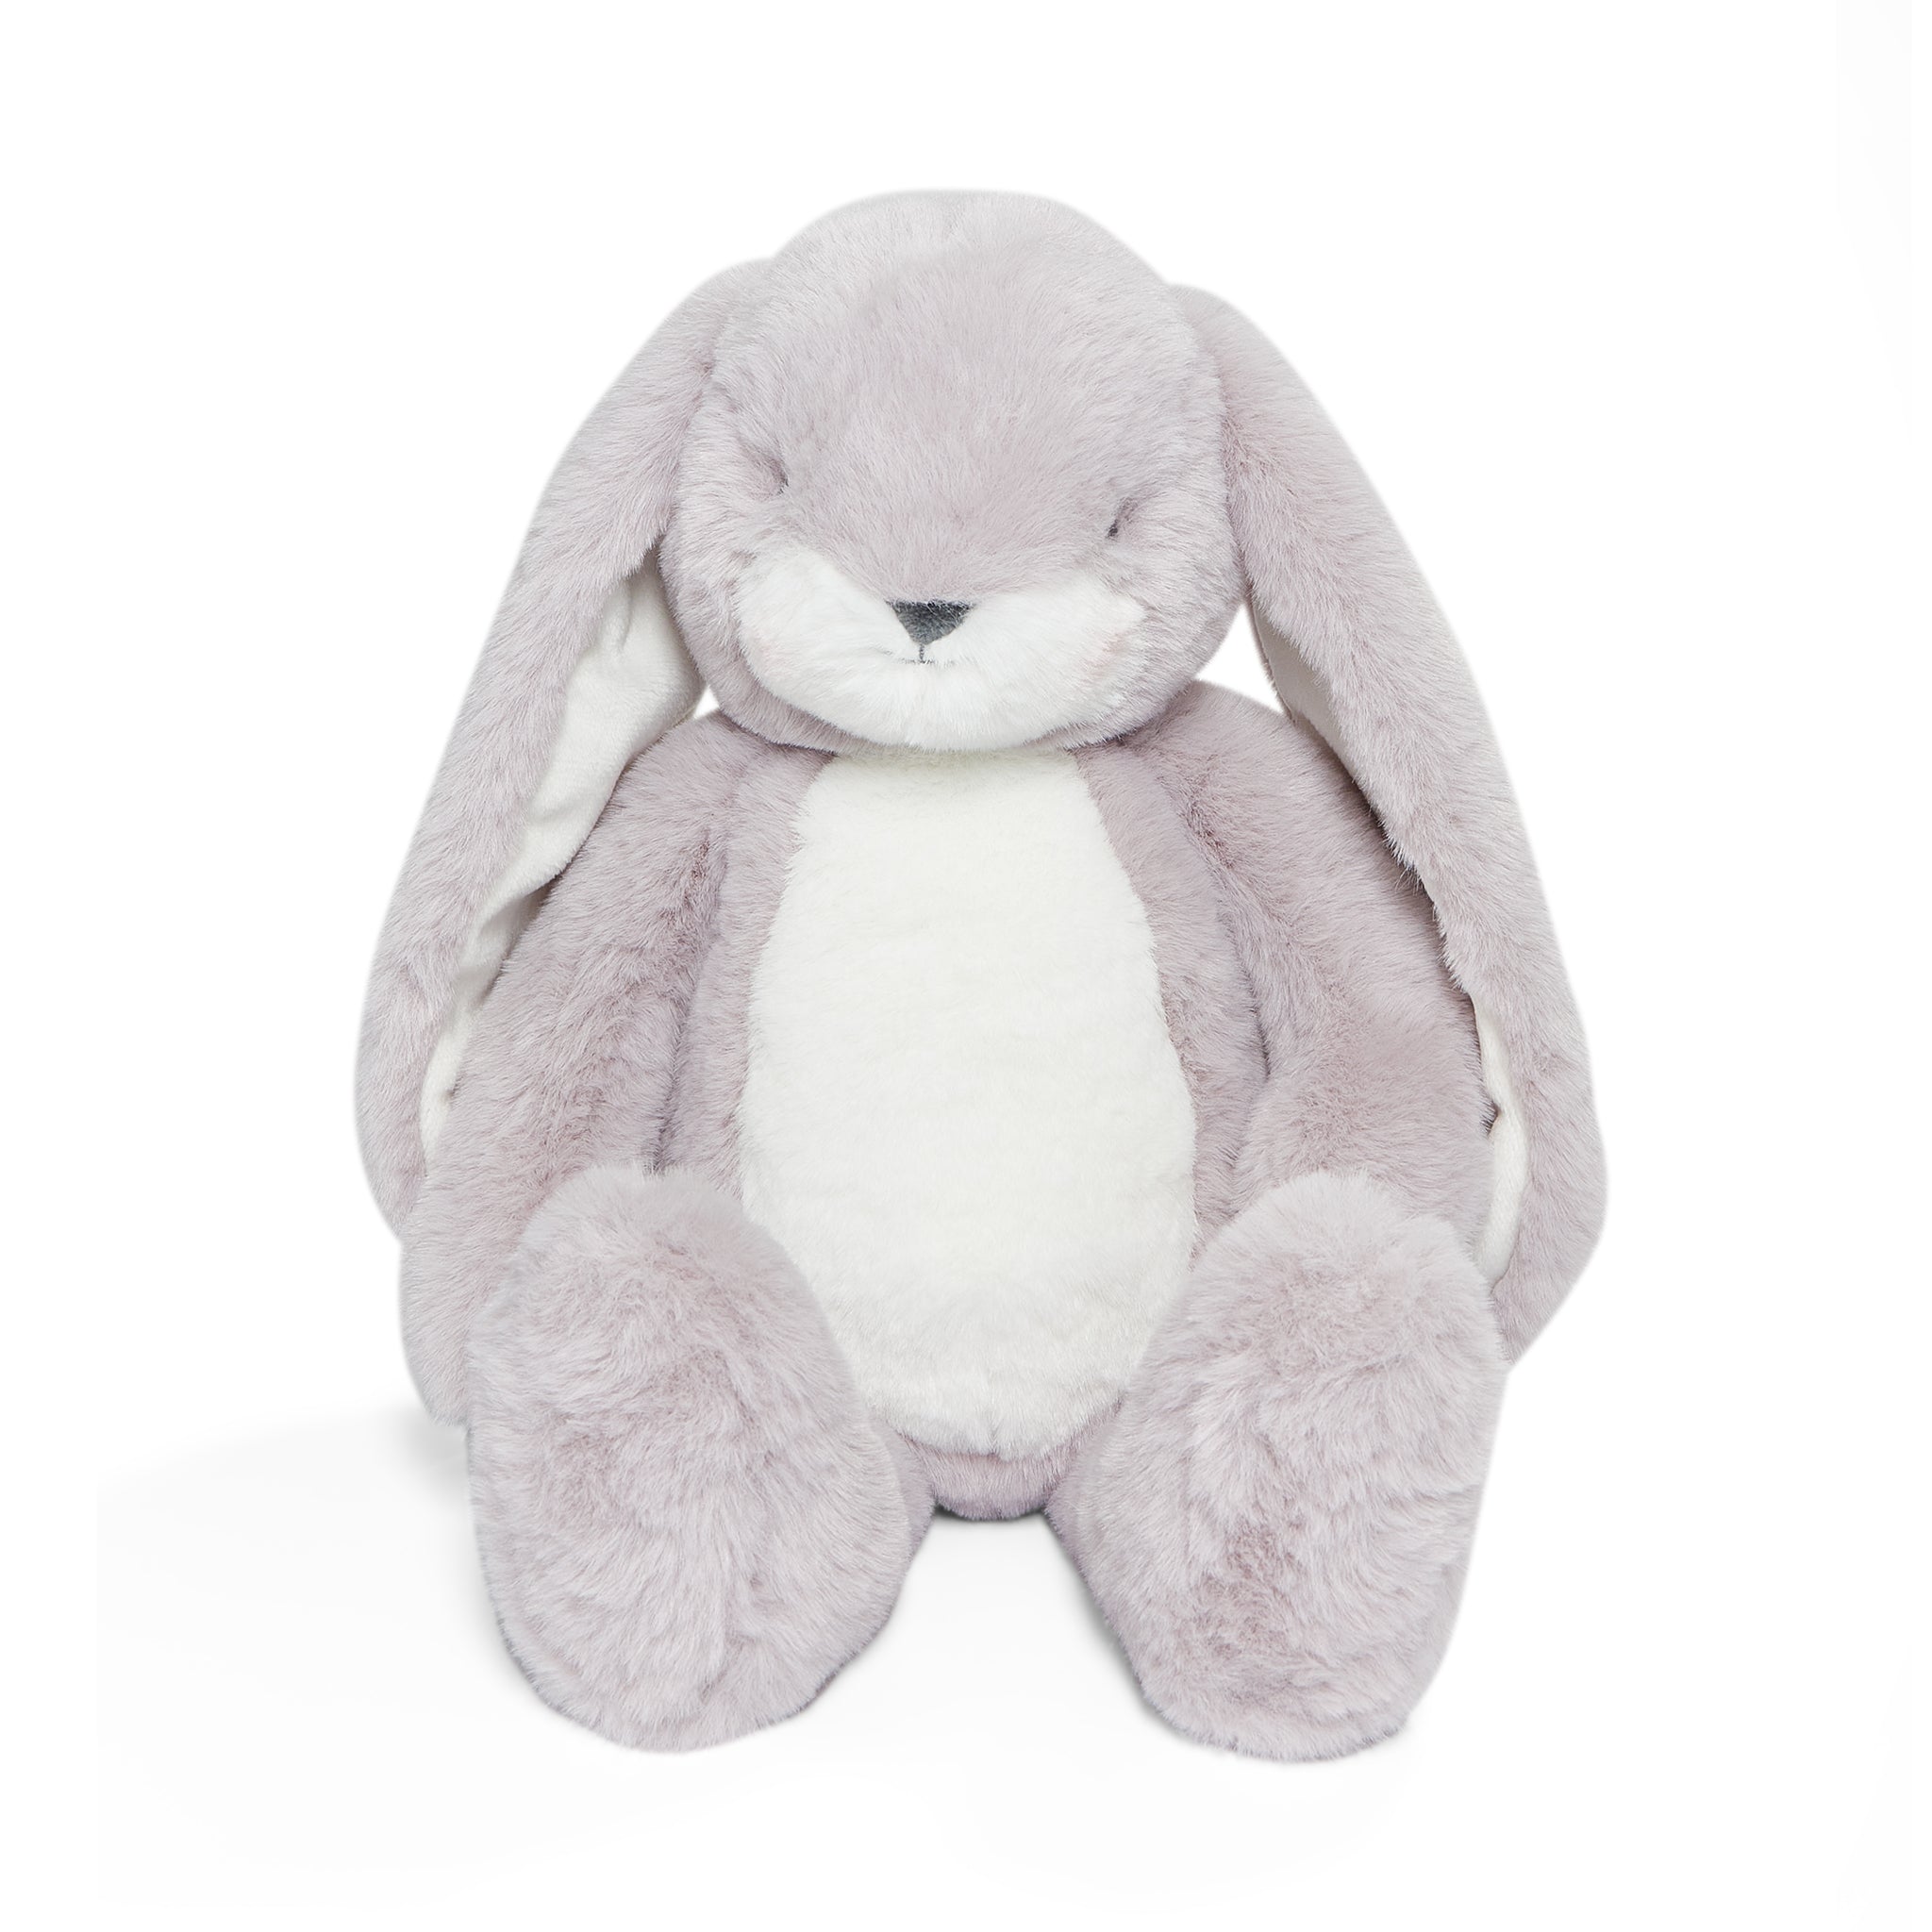 Little Floppy Nibble 12" Bunny - Lilac Marble-Stuffed Animal-SKU: 104400 - Bunnies By The Bay